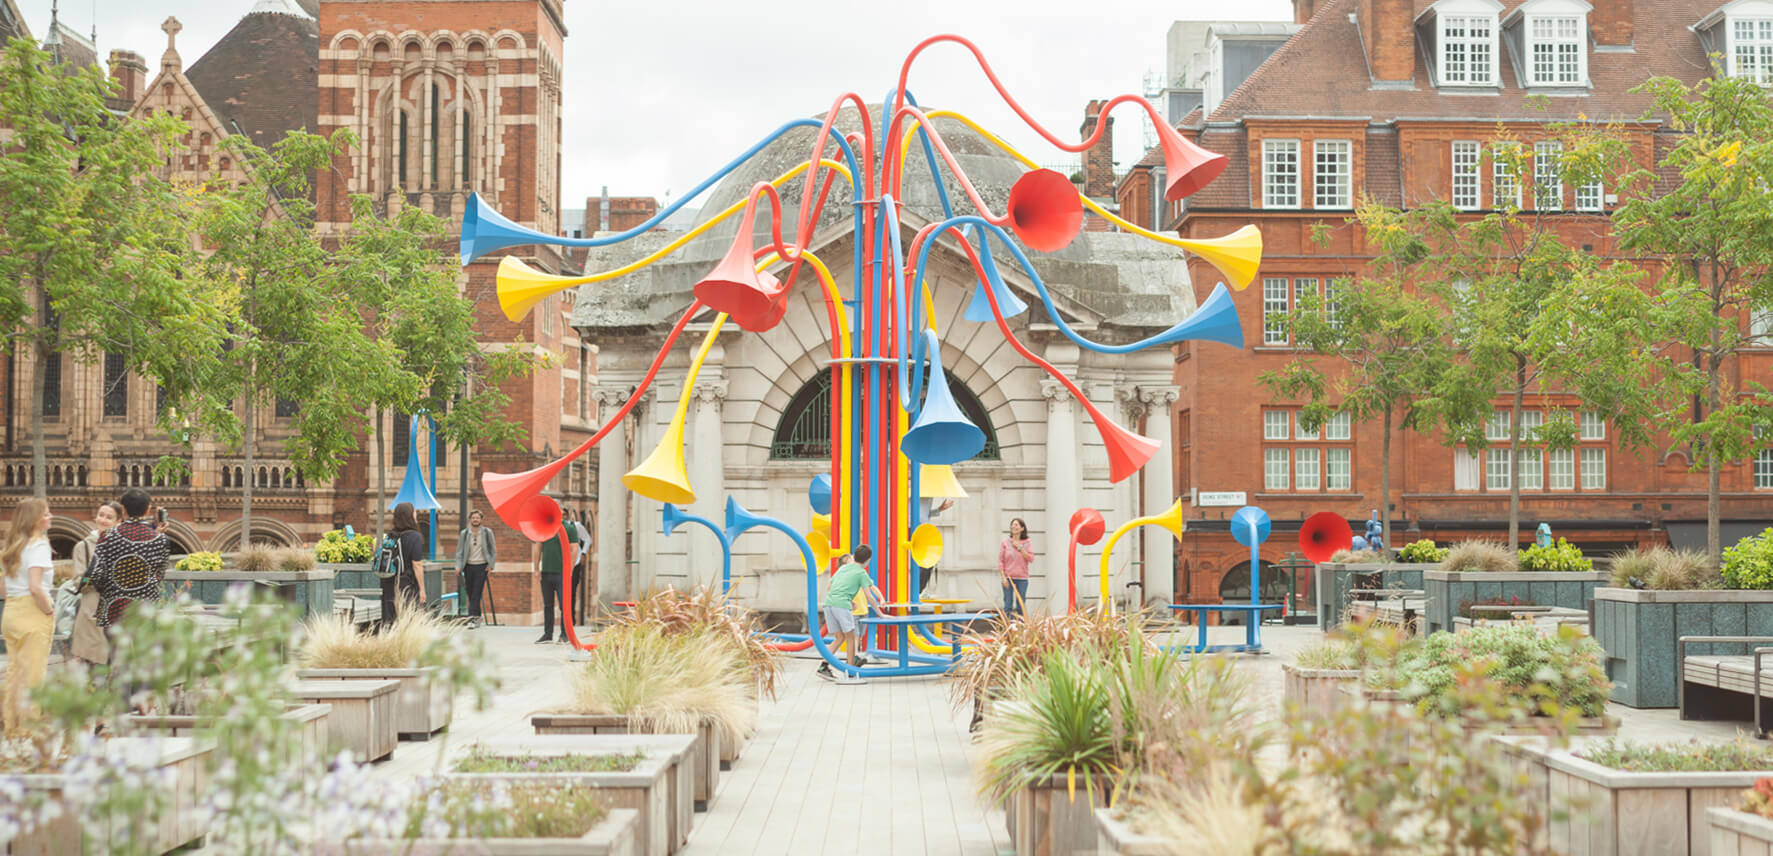 a colorful, sculptural sound installation in a park